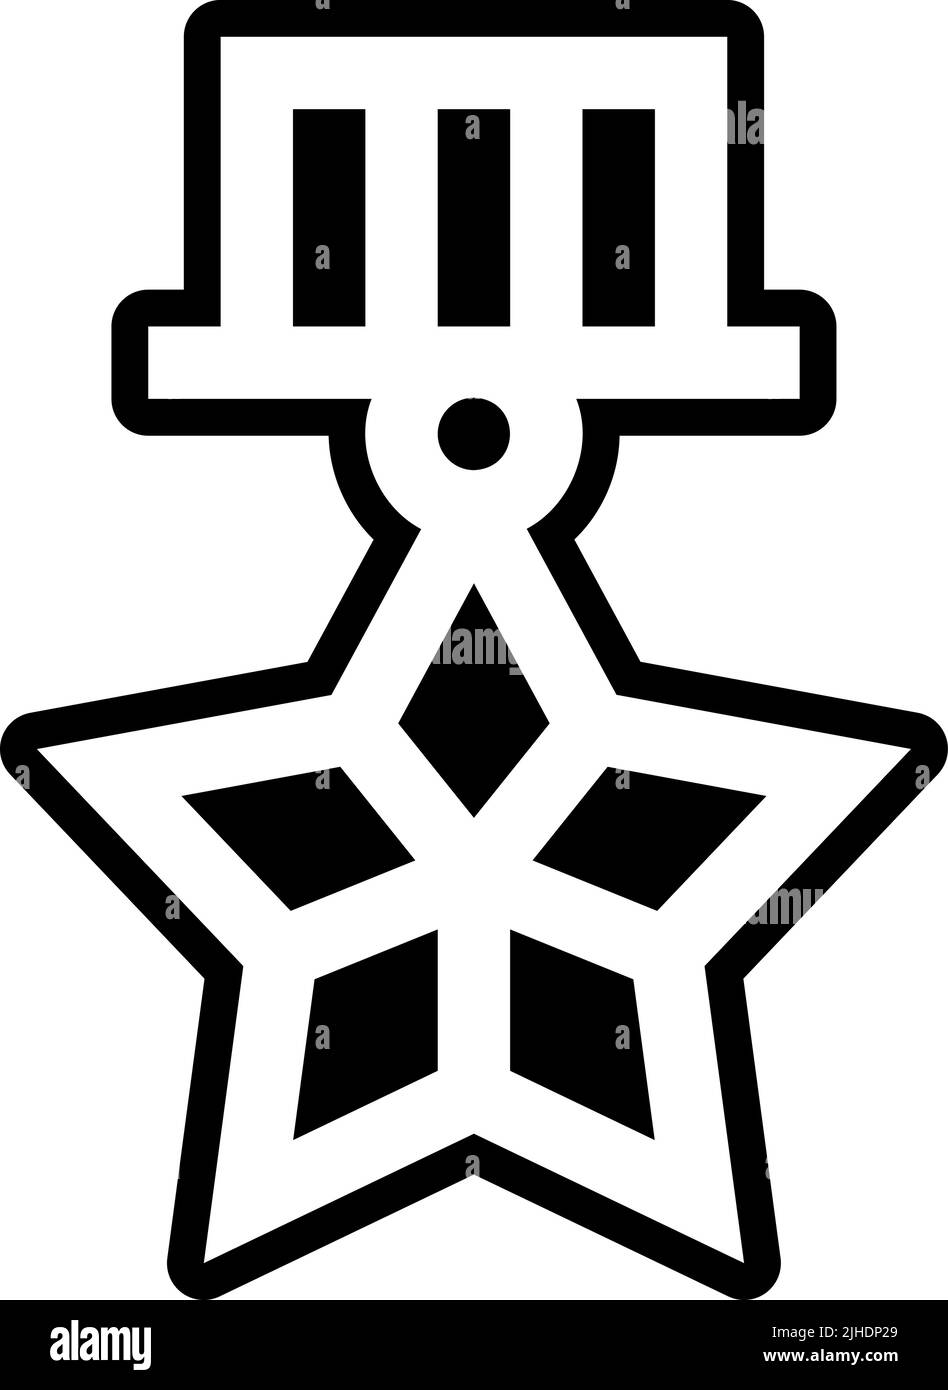 Distress Five Star Service Stamp Imitations and Triangle Mesh Star Icon  Stock Vector - Illustration of trophy, icon: 221407198